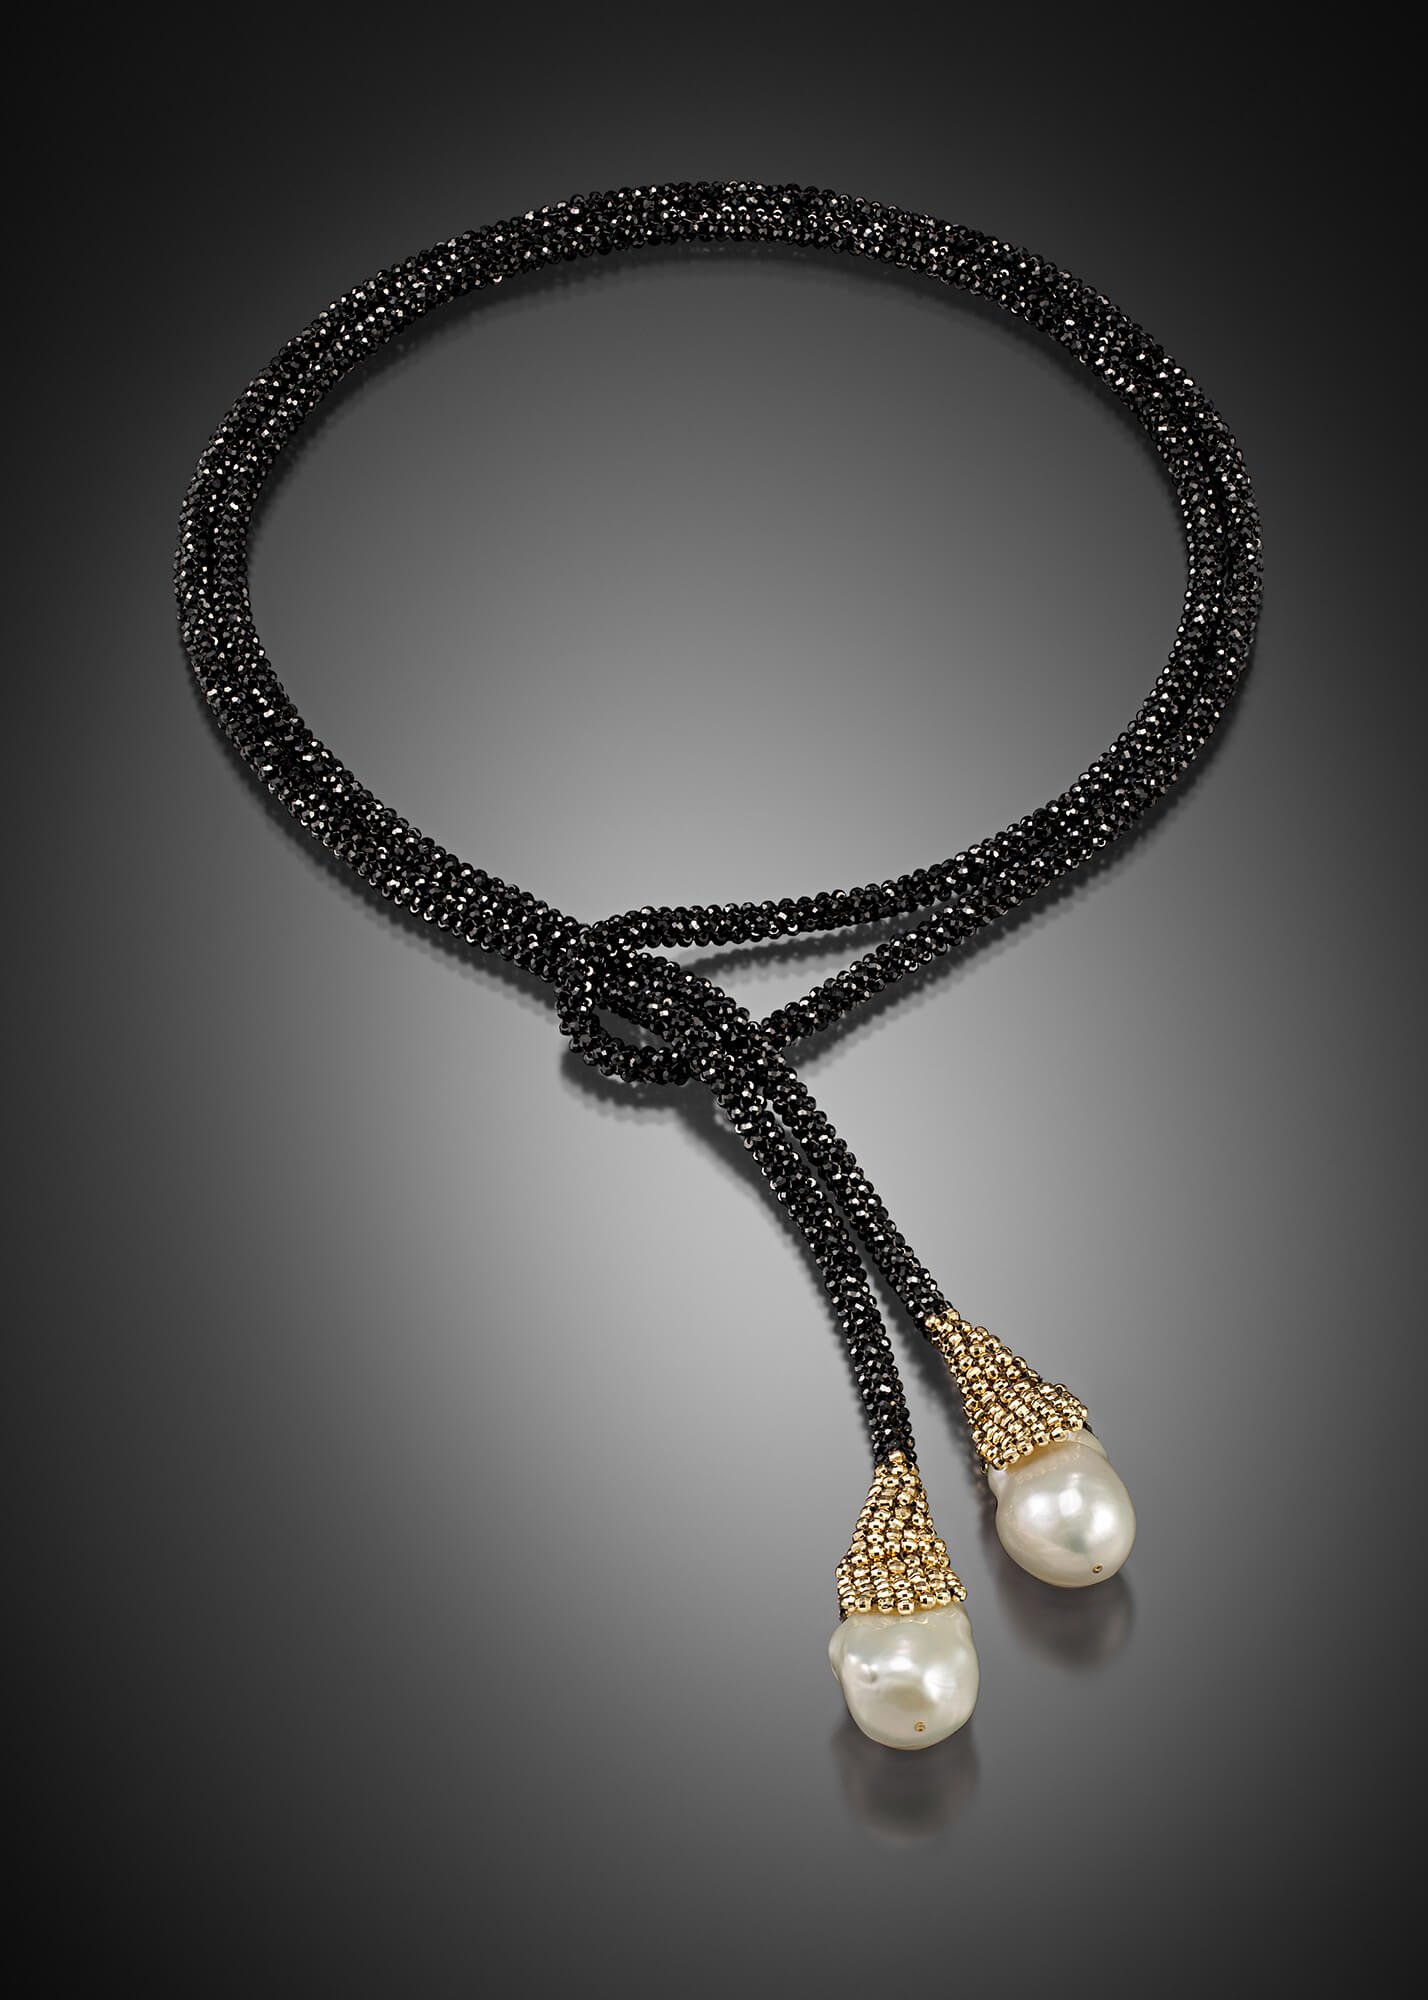 Pearl Lariat. This lariat's cord is woven of black spinel and 14k gold beads. It is finished with two baroque freshwater pearls.